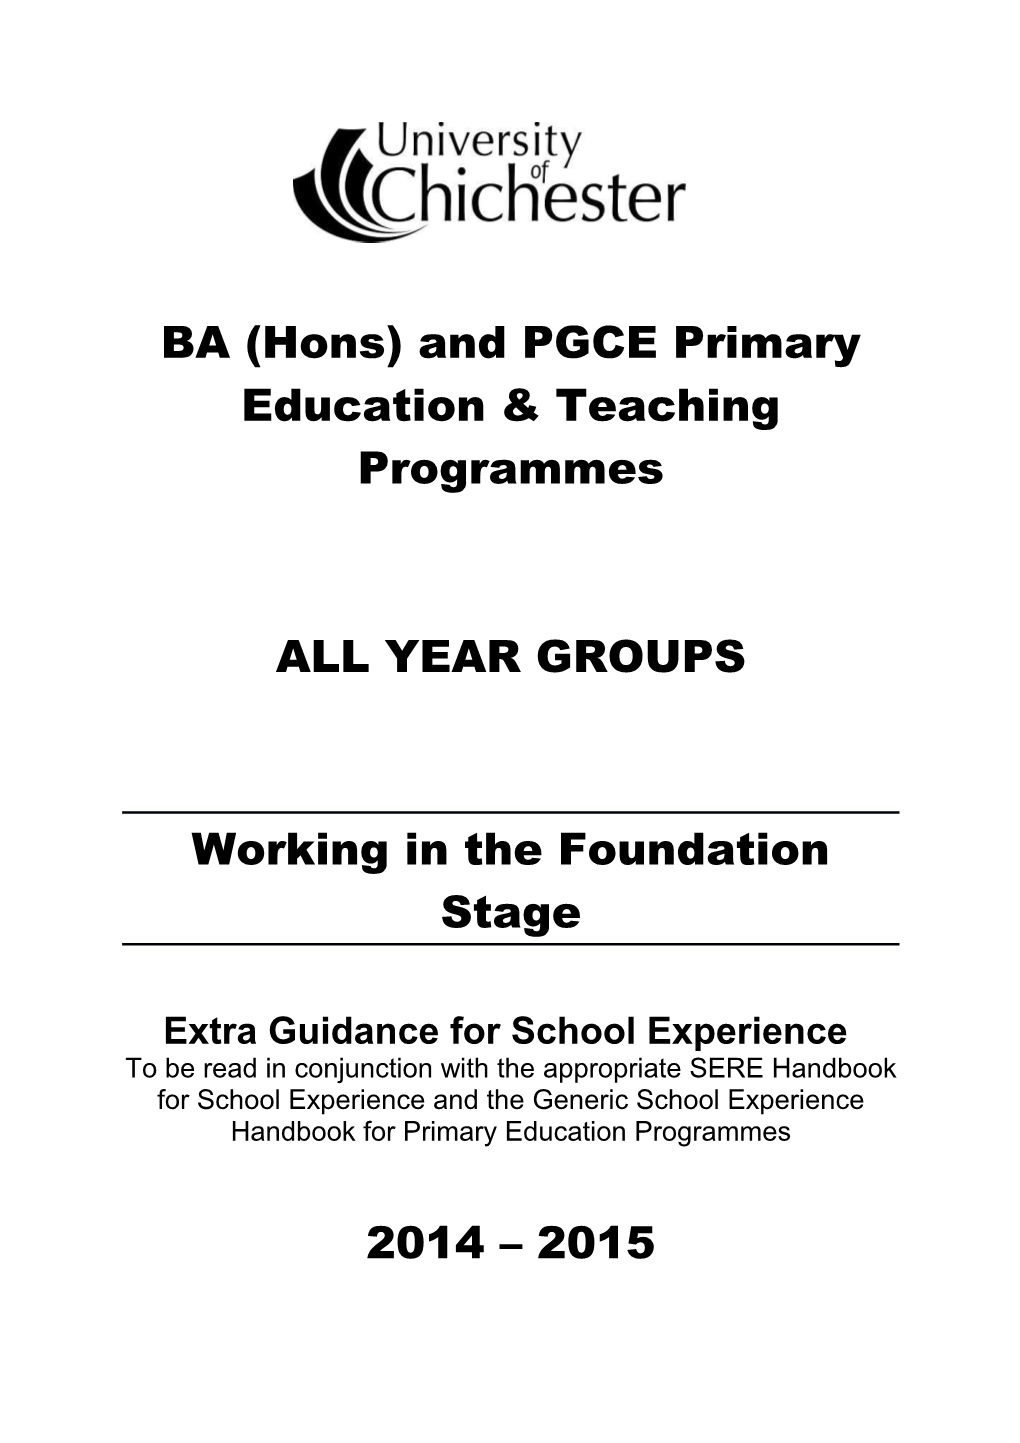 BA (Hons)And PGCE Primary Education & Teaching Programmes